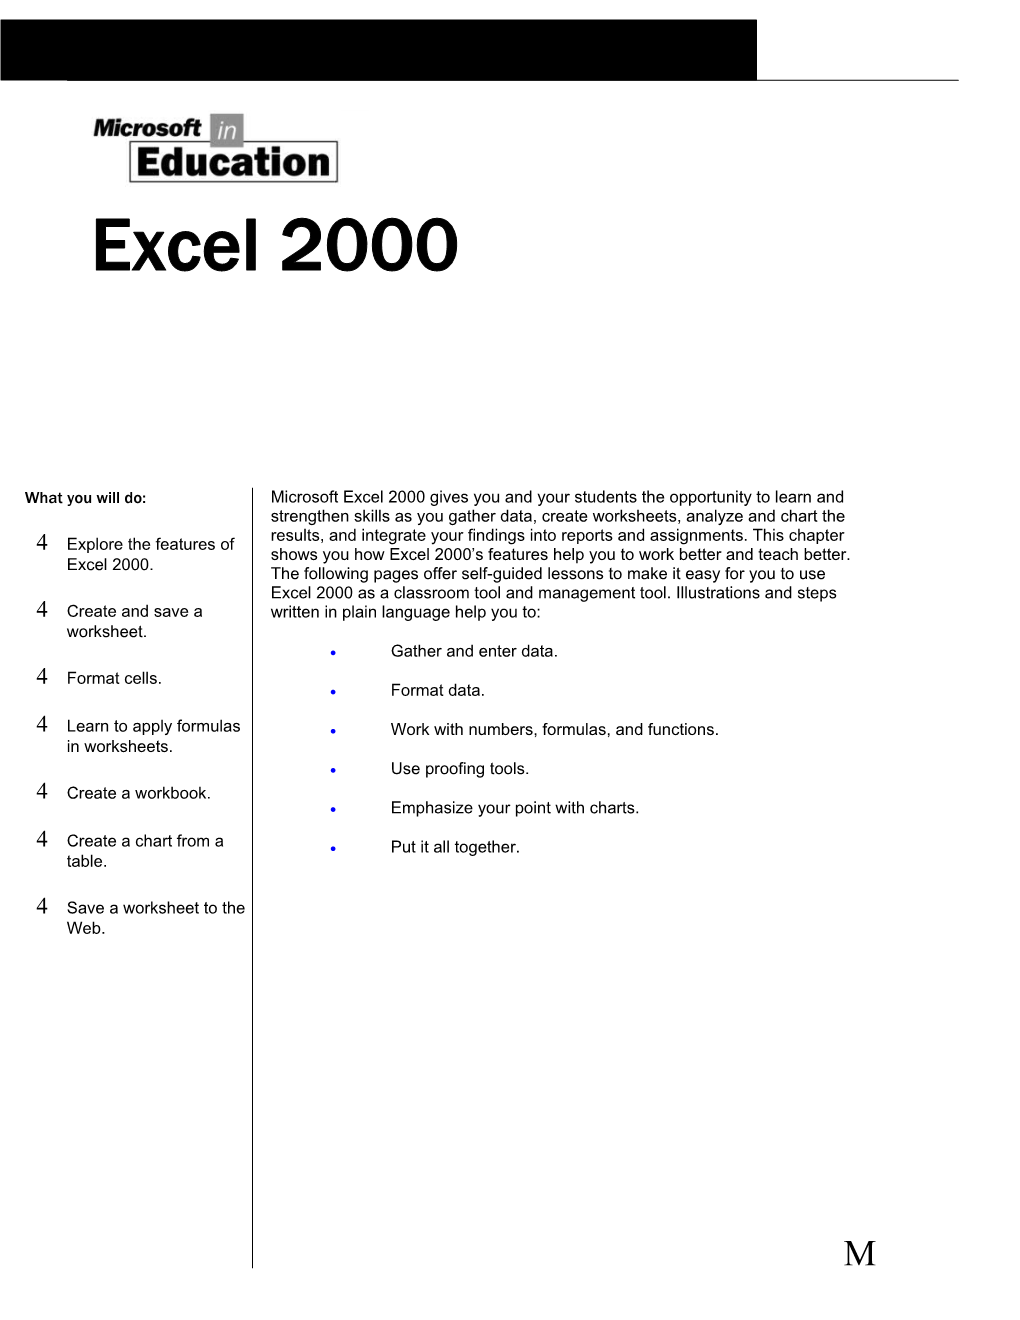 Microsoft Excel 2000 Gives You and Your Students the Opportunity to Learn and Strengthen